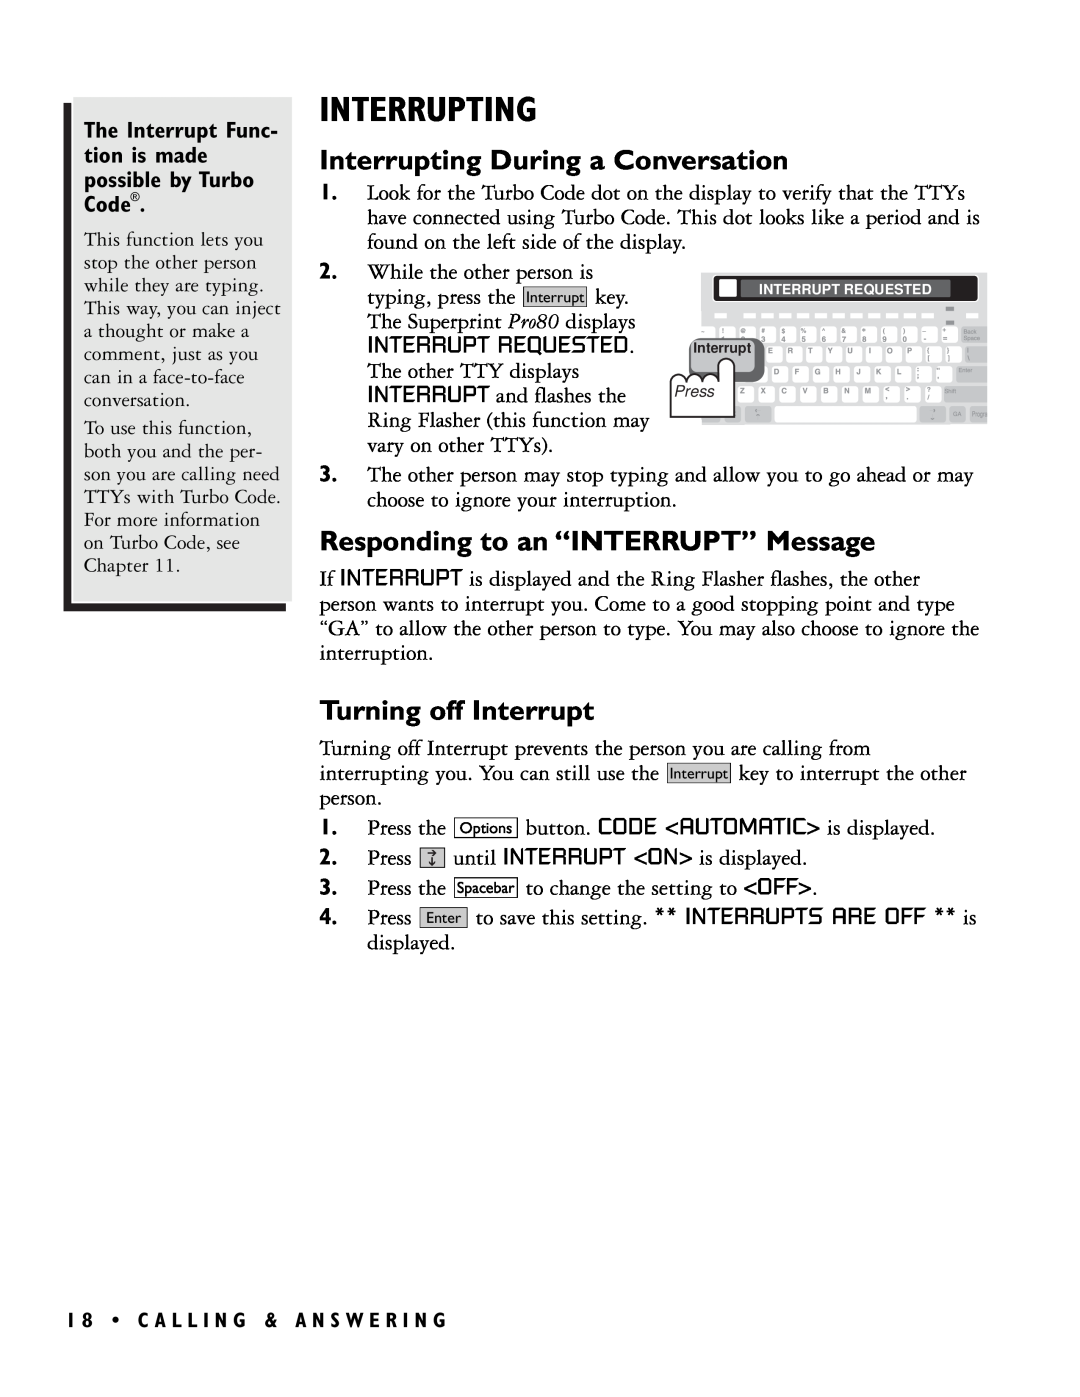 Ultratec PRO80TM manual Interrupting During a Conversation, Responding to an “INTERRUPT” Message, Turning off Interrupt 